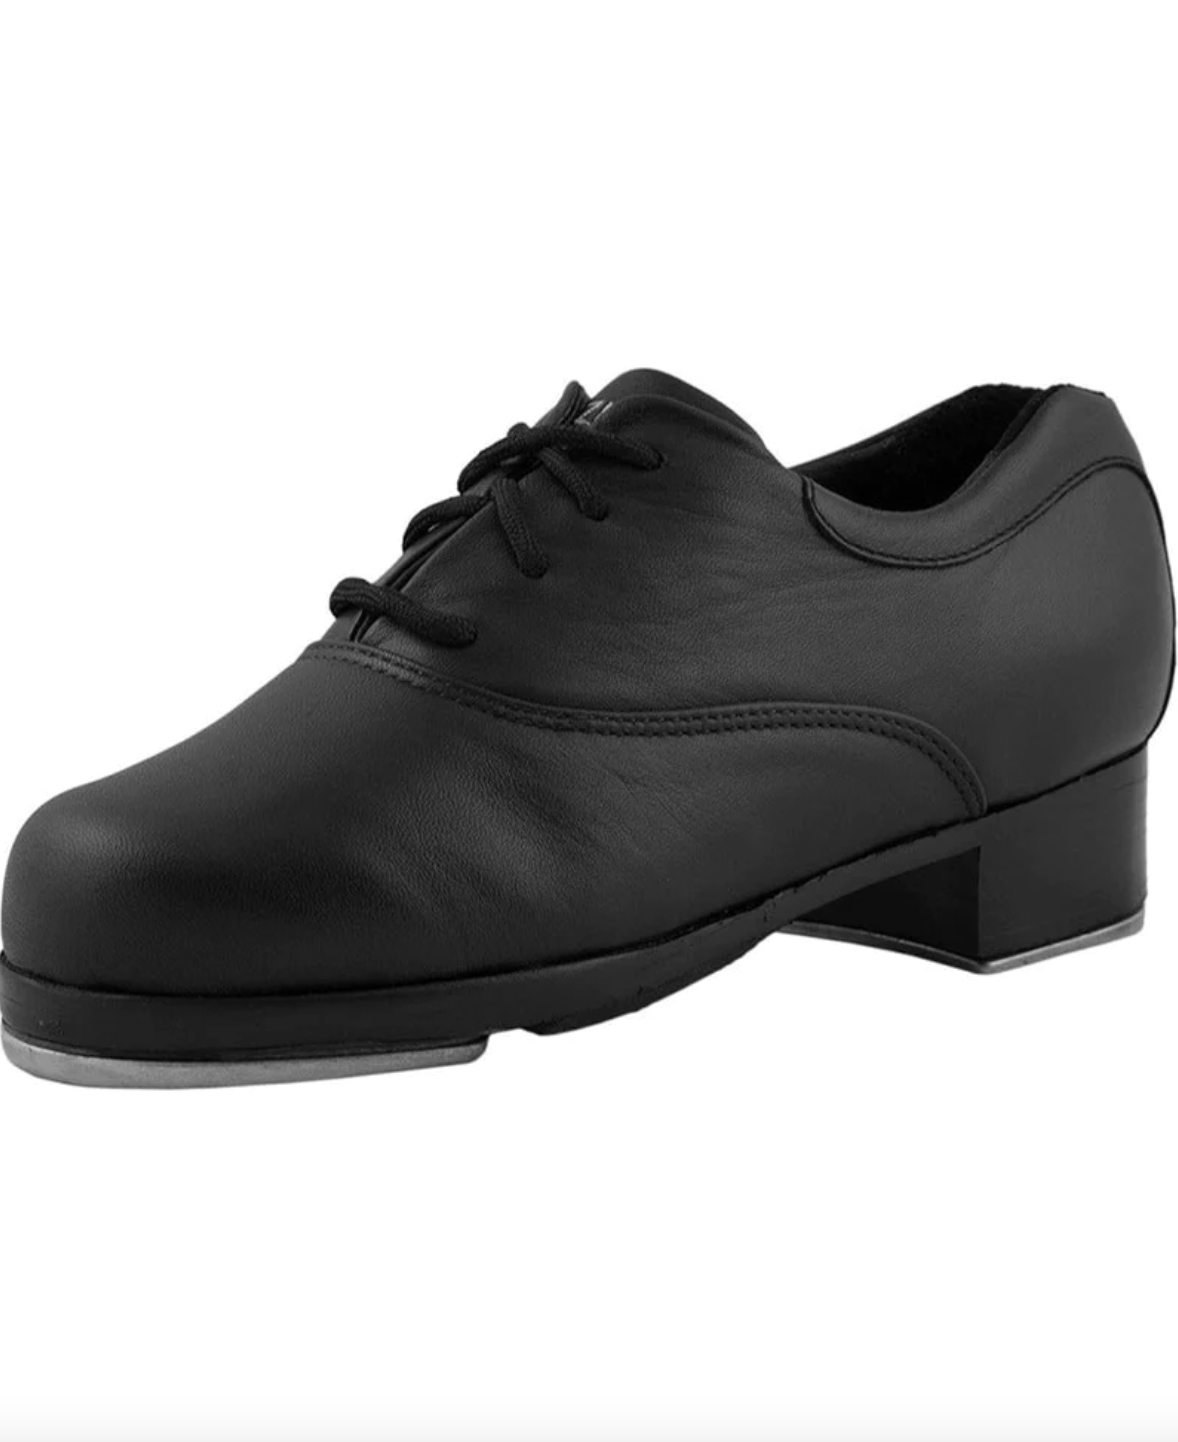 Classic Build Up Leather Oxford Tap Shoes